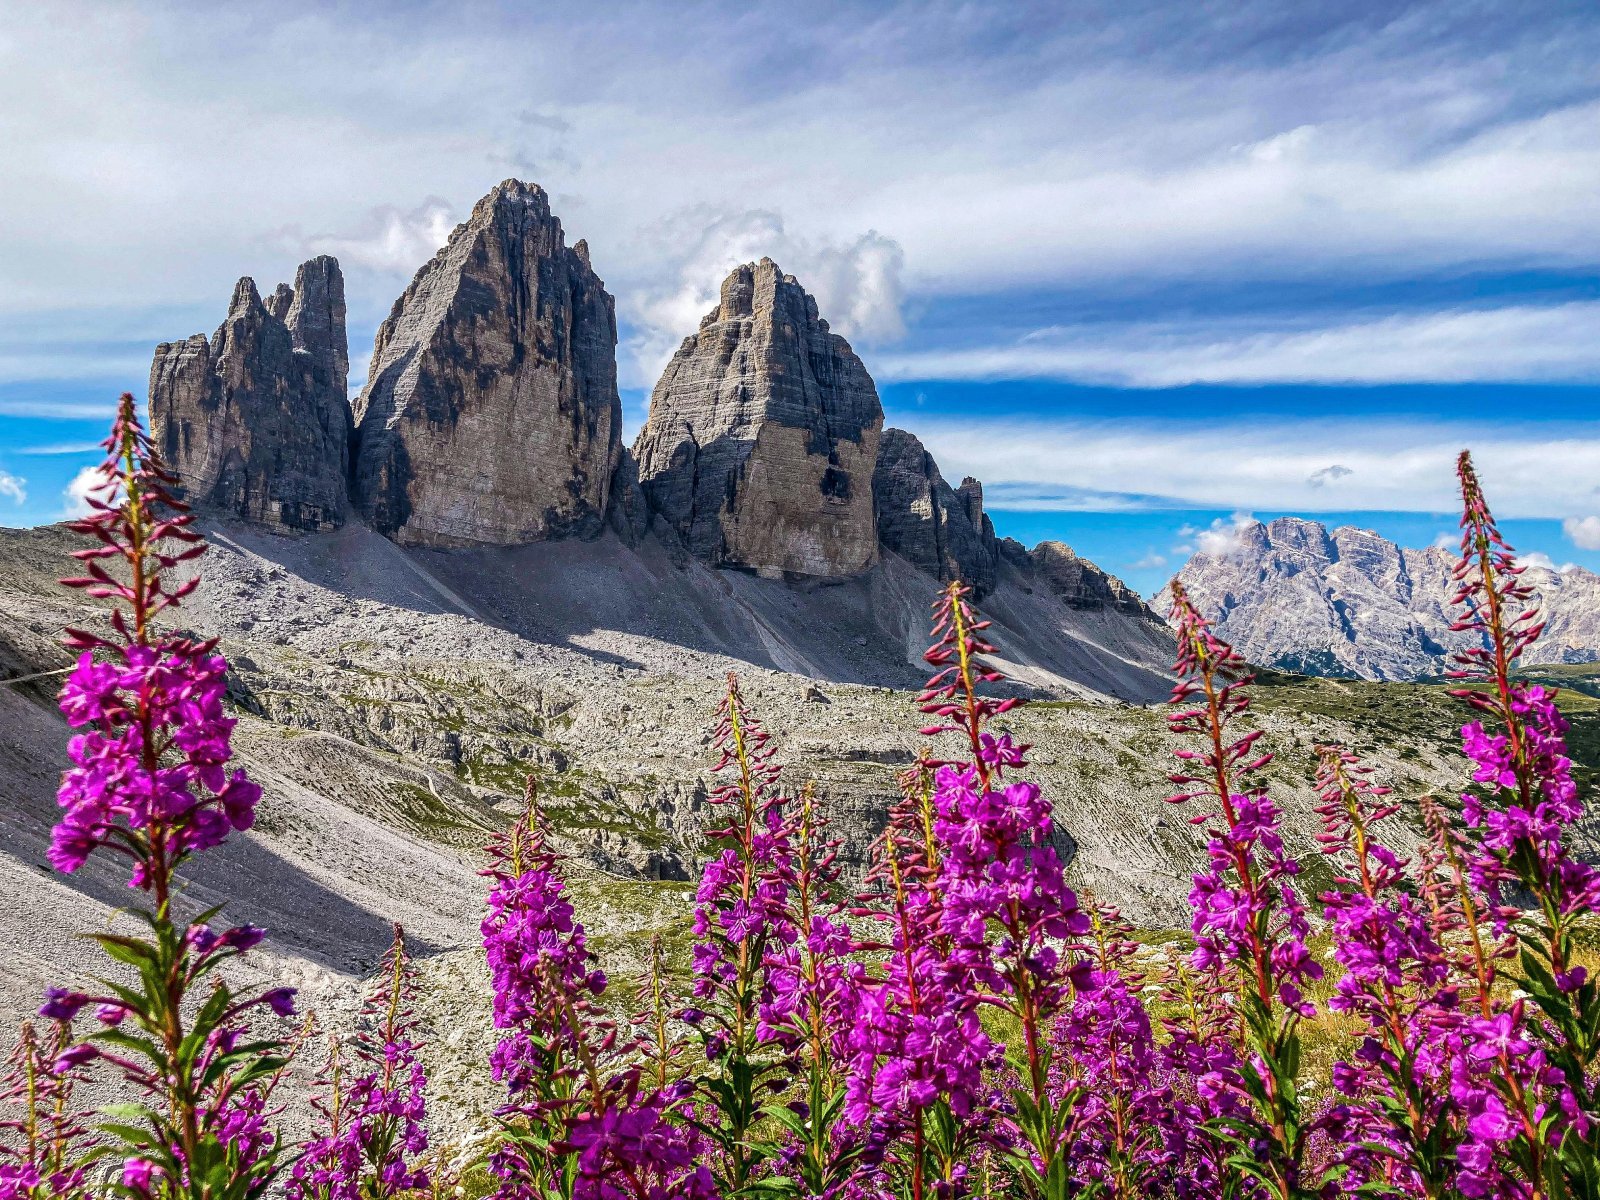 <p class="wp-caption-text">Image Credit: Pexels / Elia Pinzin</p>  <p><span>Tre Cime di Lavaredo, the three iconic battlement-like peaks, are synonymous with the Dolomites. The surrounding area offers some of the most accessible yet profoundly stunning hiking trails, providing panoramic views of the jagged mountain landscape. The circuit around the peaks is a moderate hike, allowing even those with limited mountaineering experience to immerse themselves in the heart of the Dolomites. Along the way, historical sites from World War I, including tunnels and fortifications, tell the story of the region’s past.</span></p>